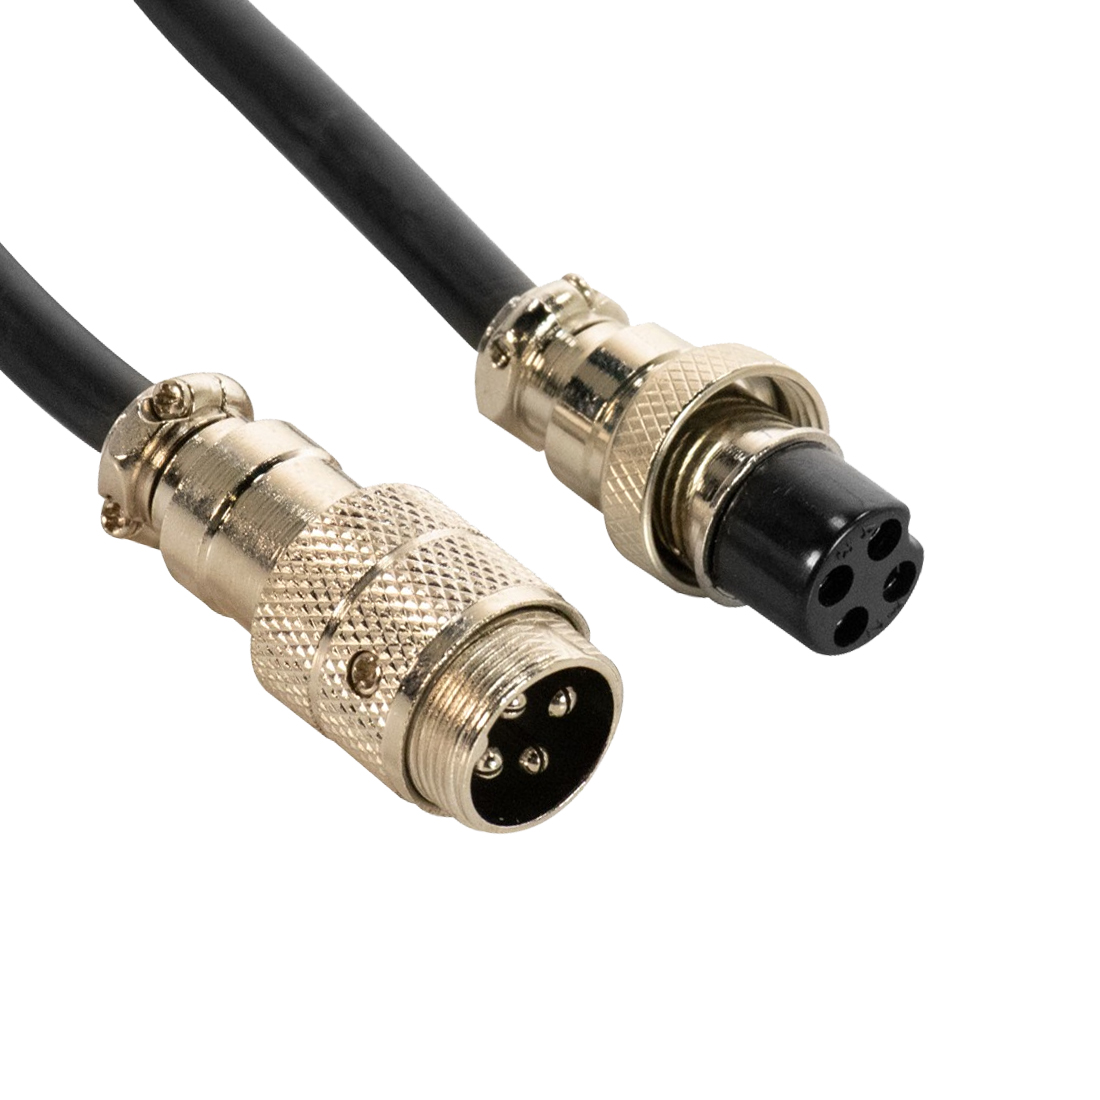 Extension Cable LED Pixel Tube 360 3m